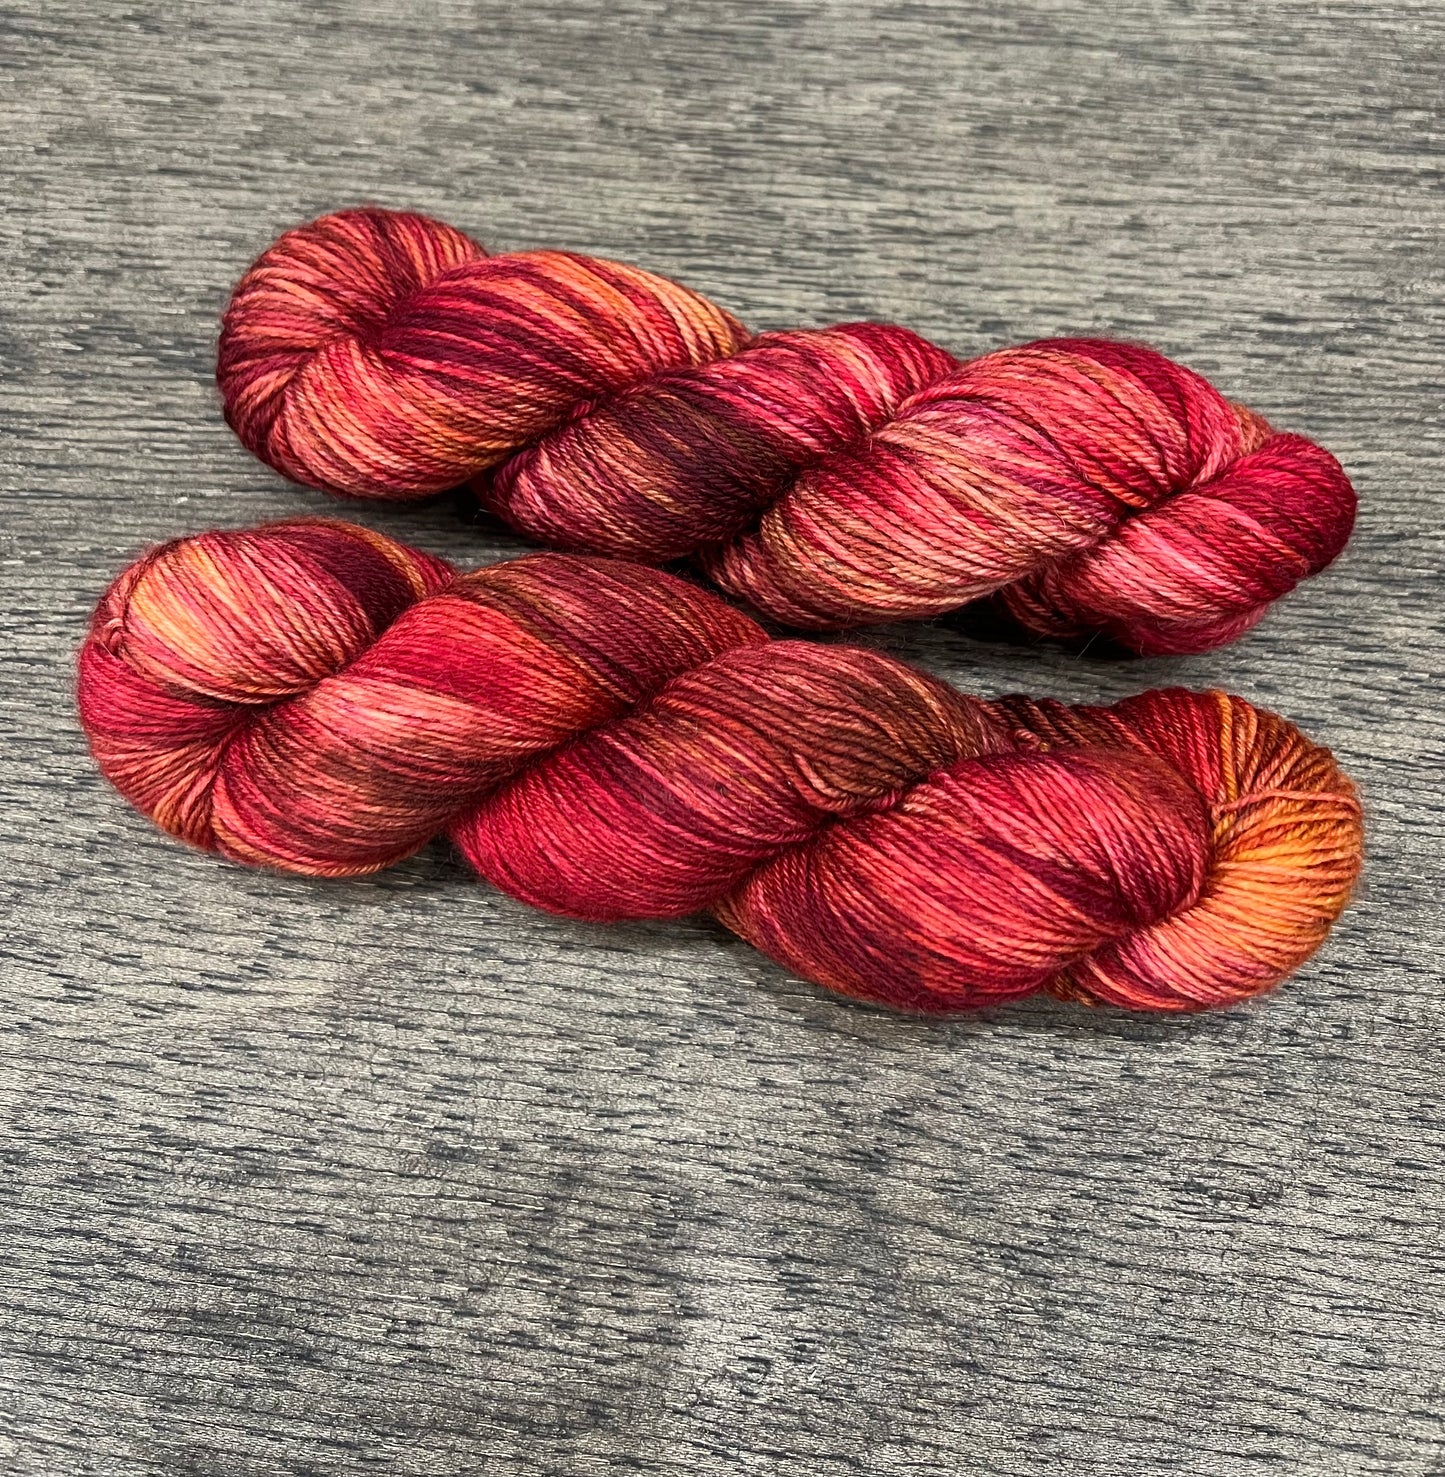 Hand Dyed Yarn Club Monthly Subscription OUTLANDER inspired Knitting Crochet Gift FEBRUARY Mystery Skein for Crafters